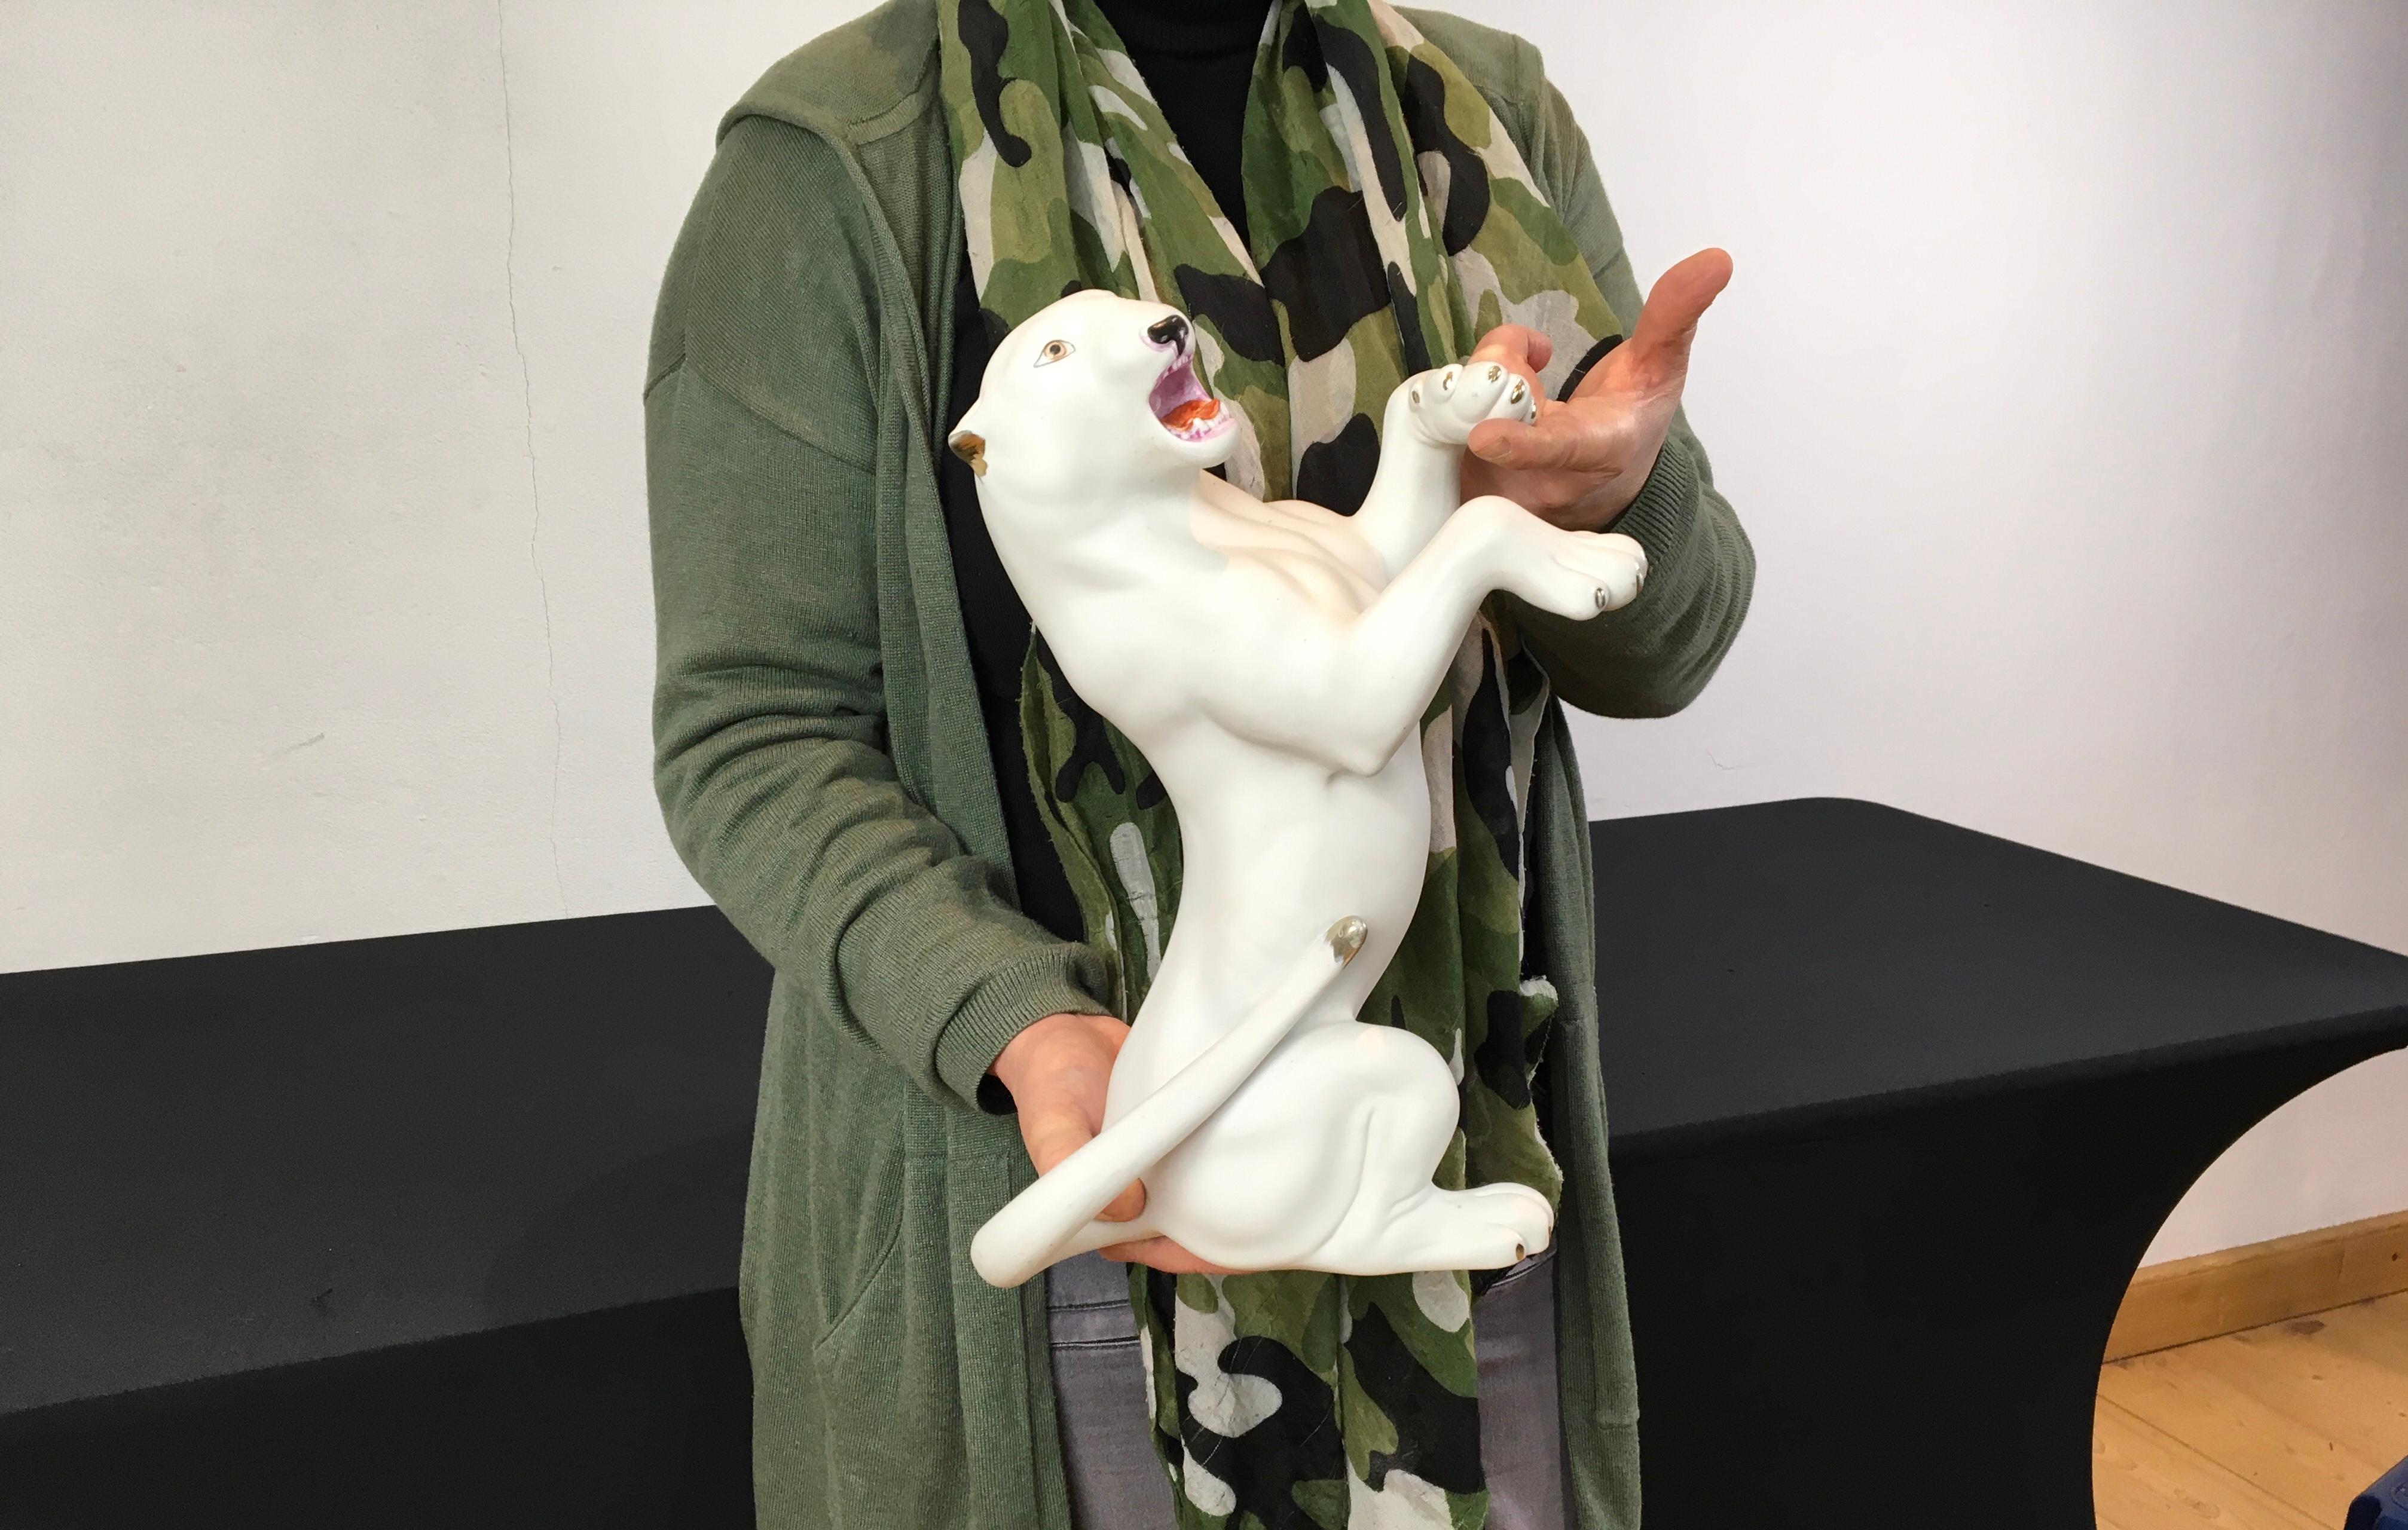 White Puma Sculpture. 
A bisquit - unglazed porcelain puma sculpture. 
This White Puma Sculpture is very expressive and has hand-painted golden accents on the claws, ears and tale. It's a stylish detailed animal sculpture; look at the mouth, tongue